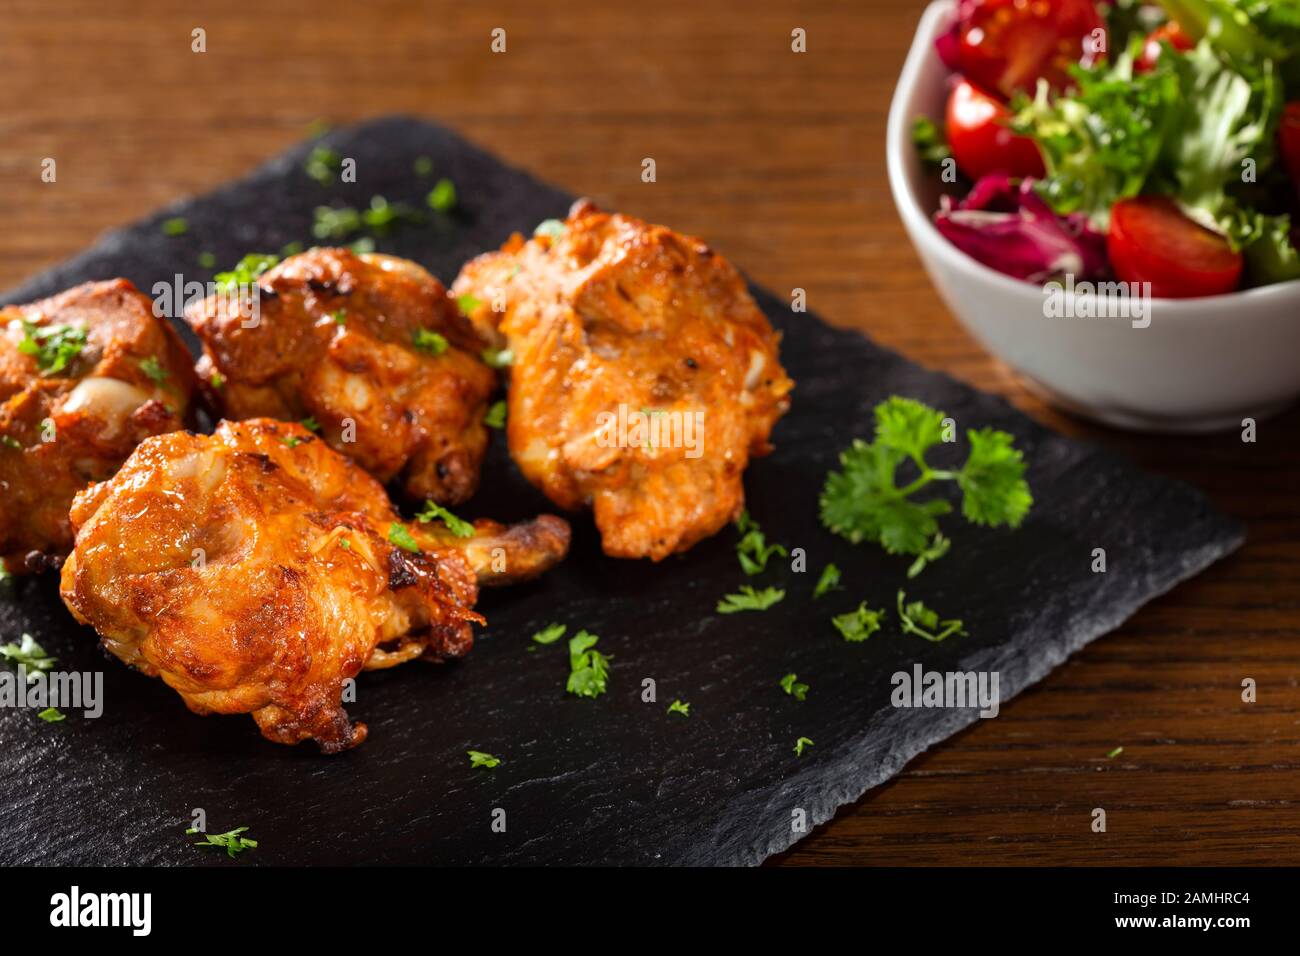 Roasted chicken drumsticks with fresh salad Stock Photo